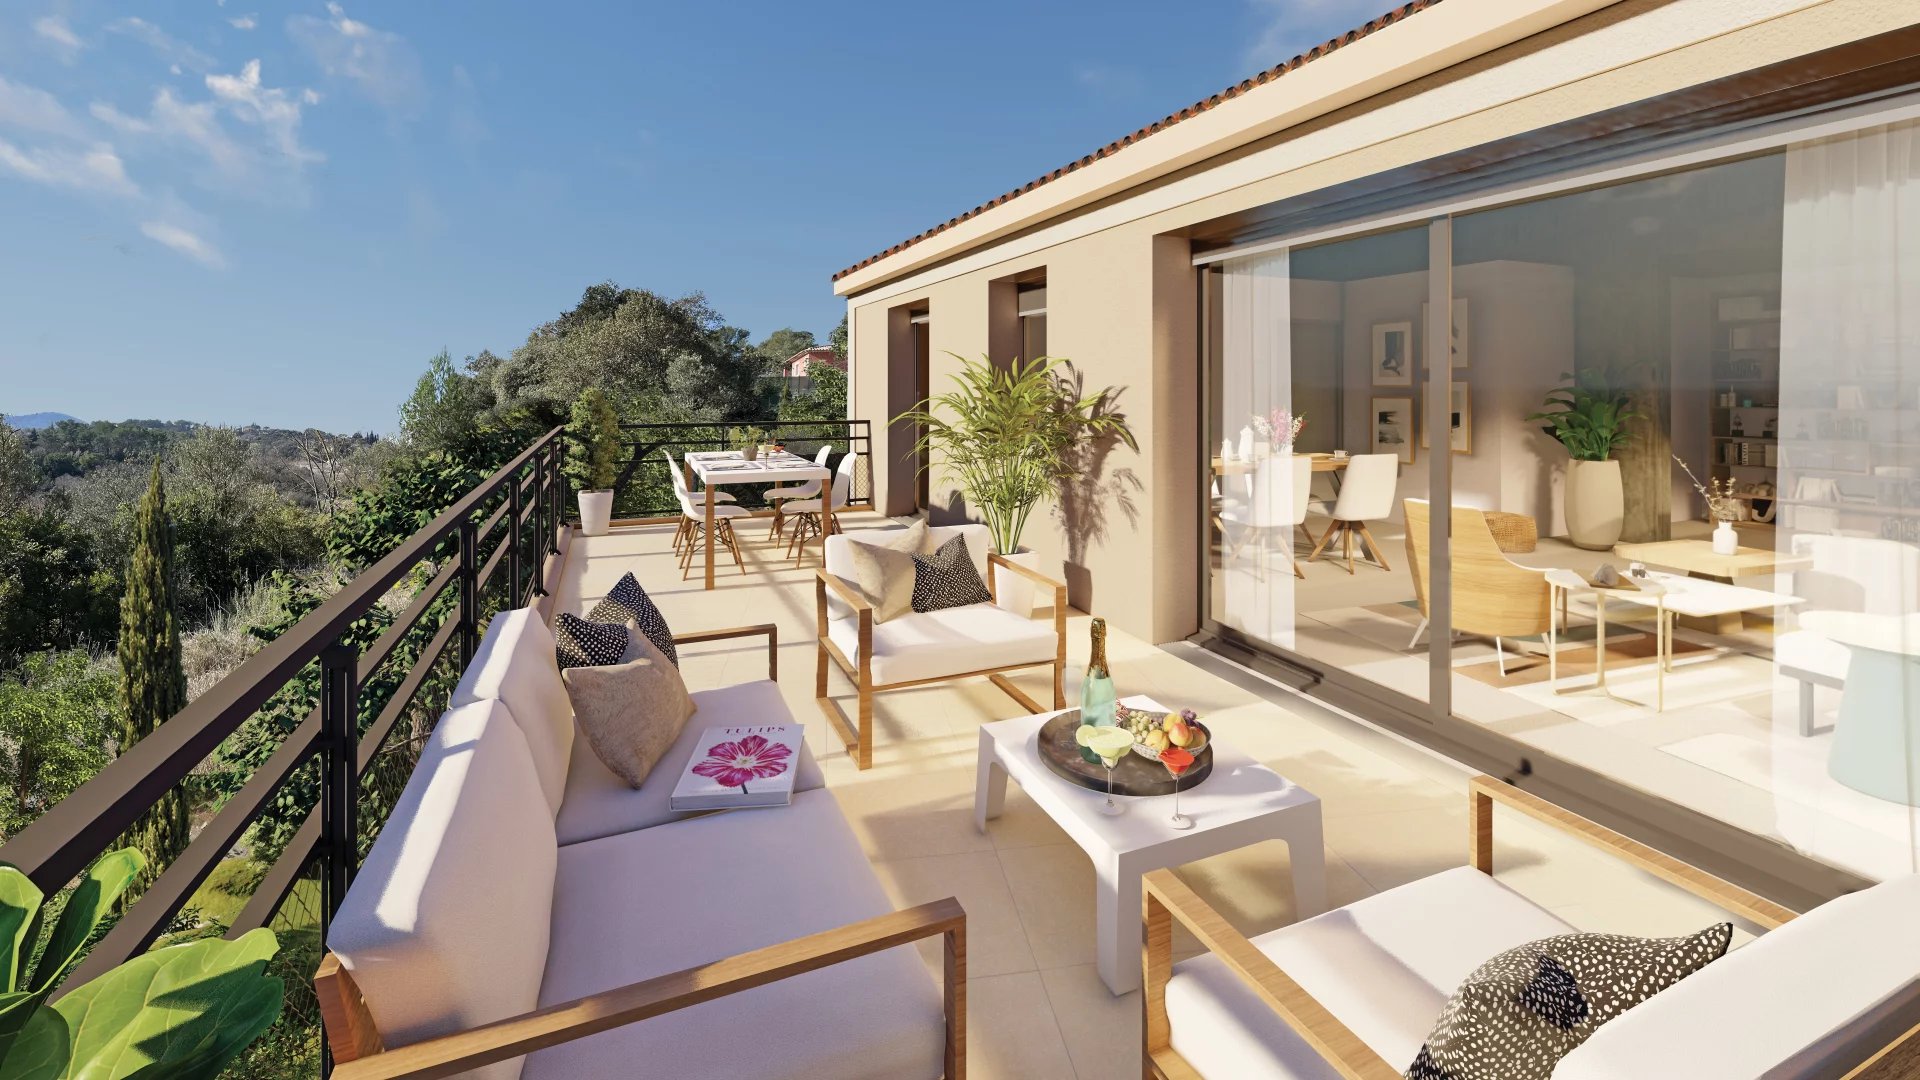 New 1-bedroom apartment with terrace - Carcès